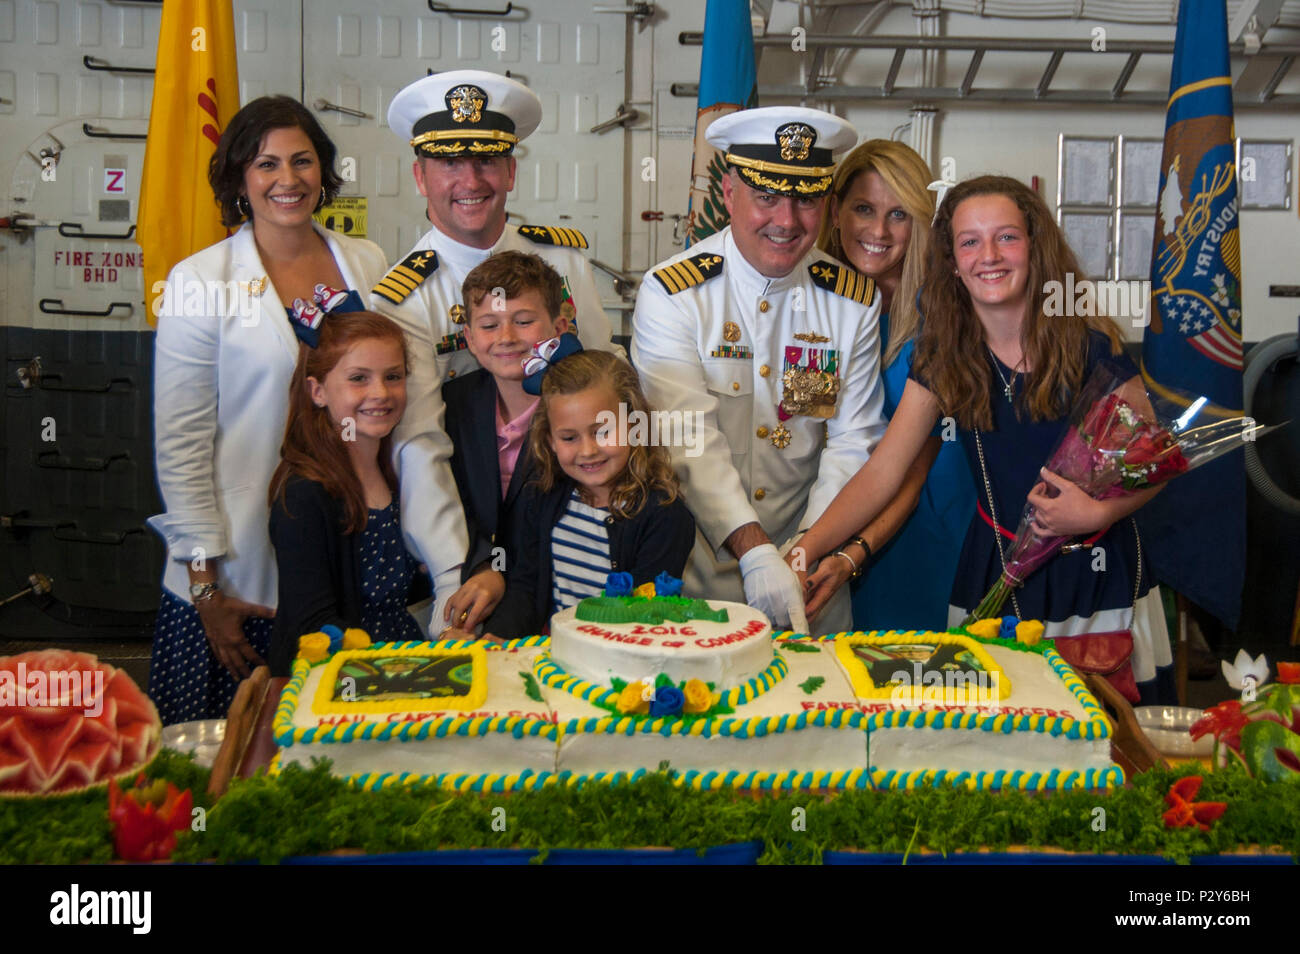 160804-N-EW322-228 SAN DIEGO (Aug. 4, 2016) – Capt. Mark Melson, the incoming Commanding Officer of the amphibious assault ship USS Makin Island (LHD 8), left, Capt. Jon P. Rodgers, the outgoing Commanding Officer, right, and their families cut a cake during a change of command ceremony in the ship’s hangar bay. Makin Island is homeported in San Diego. (U.S. Navy photo by Mass Communication Specialist Seaman Clark D. Lane/Released) Stock Photo